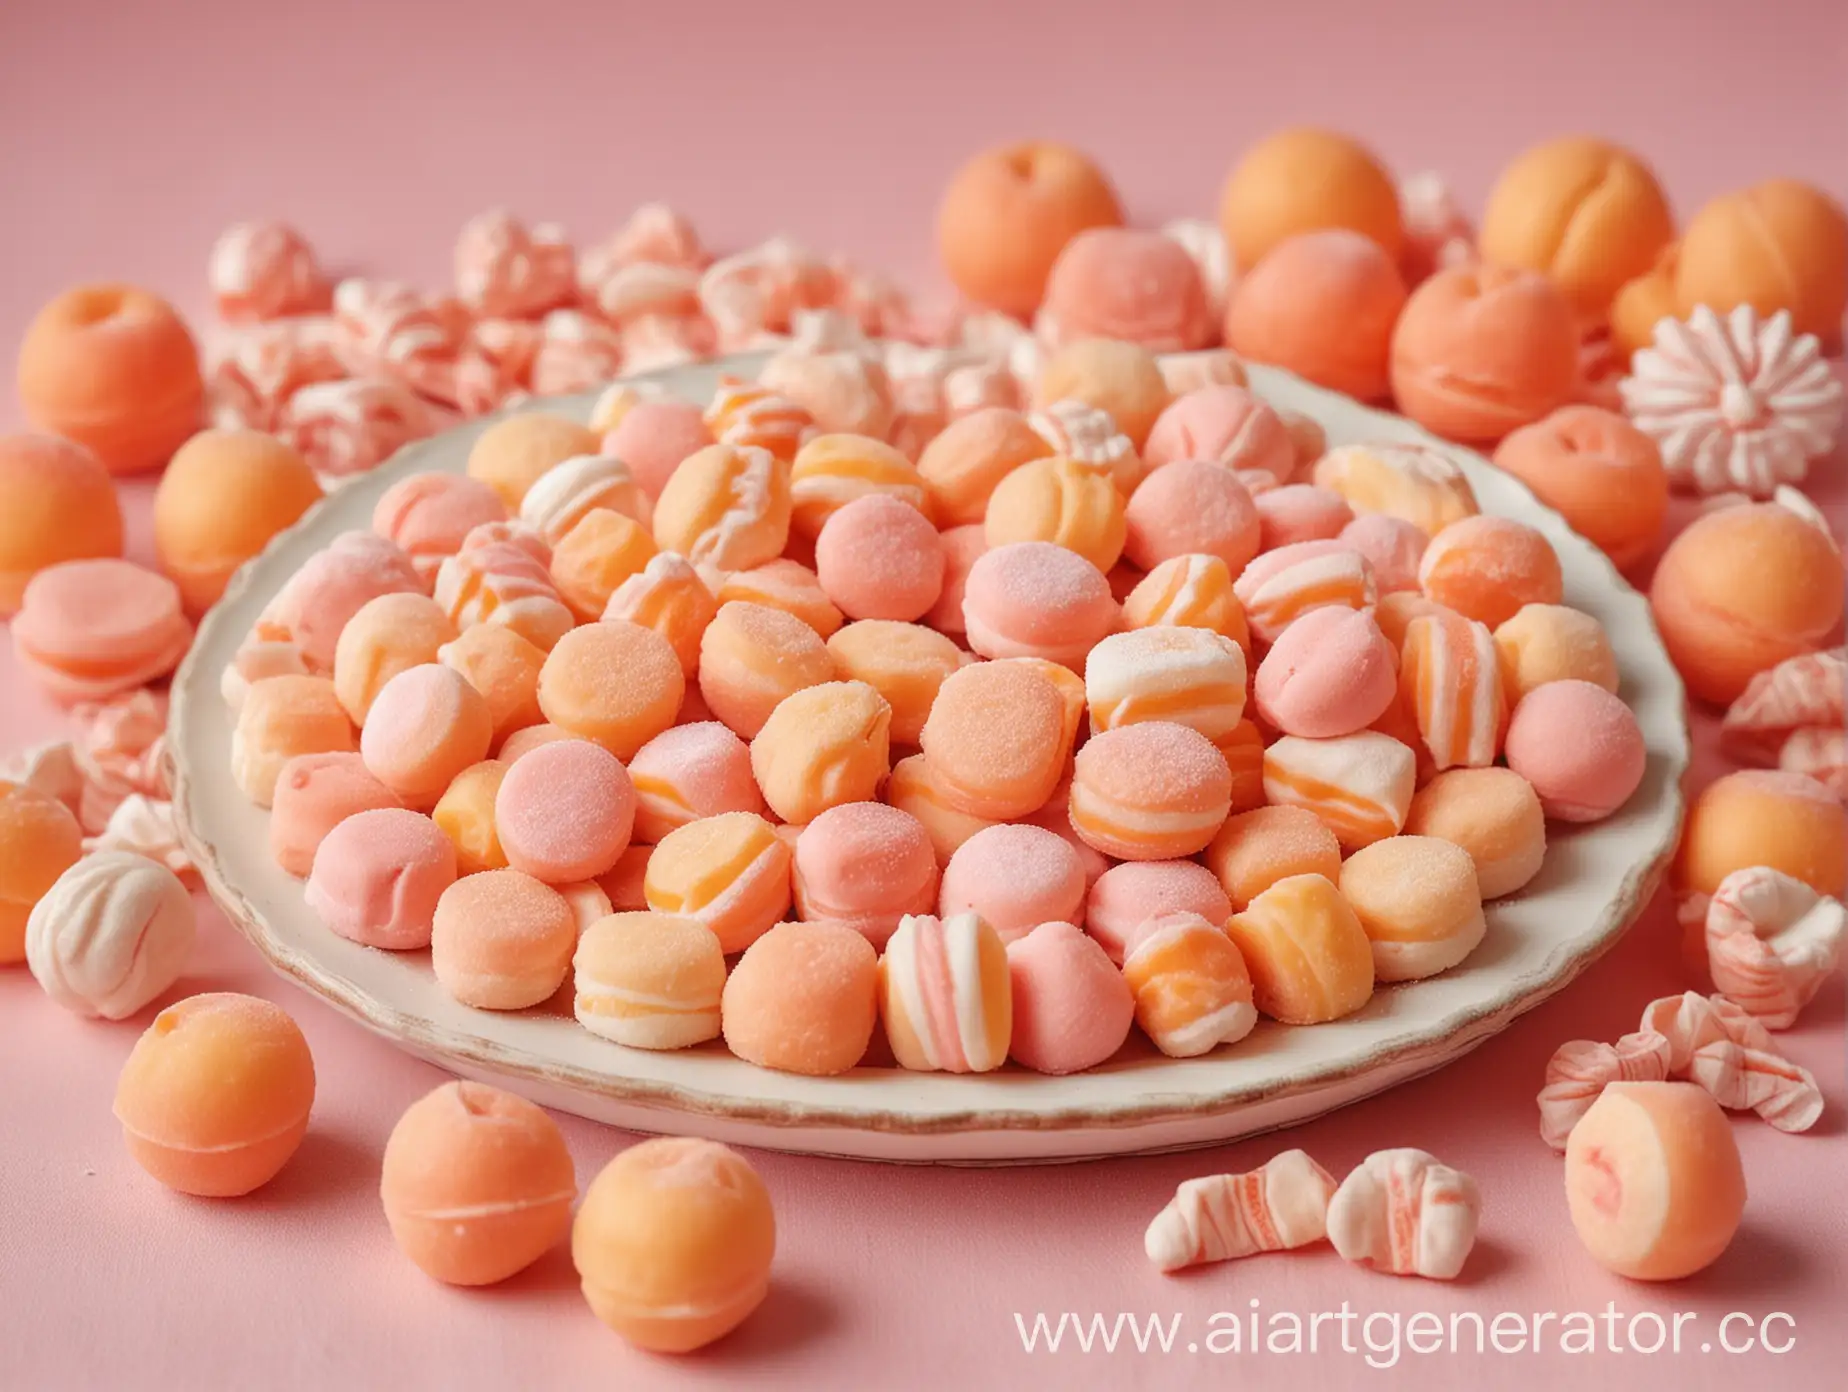 Sweet-Pastel-Presentation-Background-with-Peach-Tones-and-Assorted-Candies